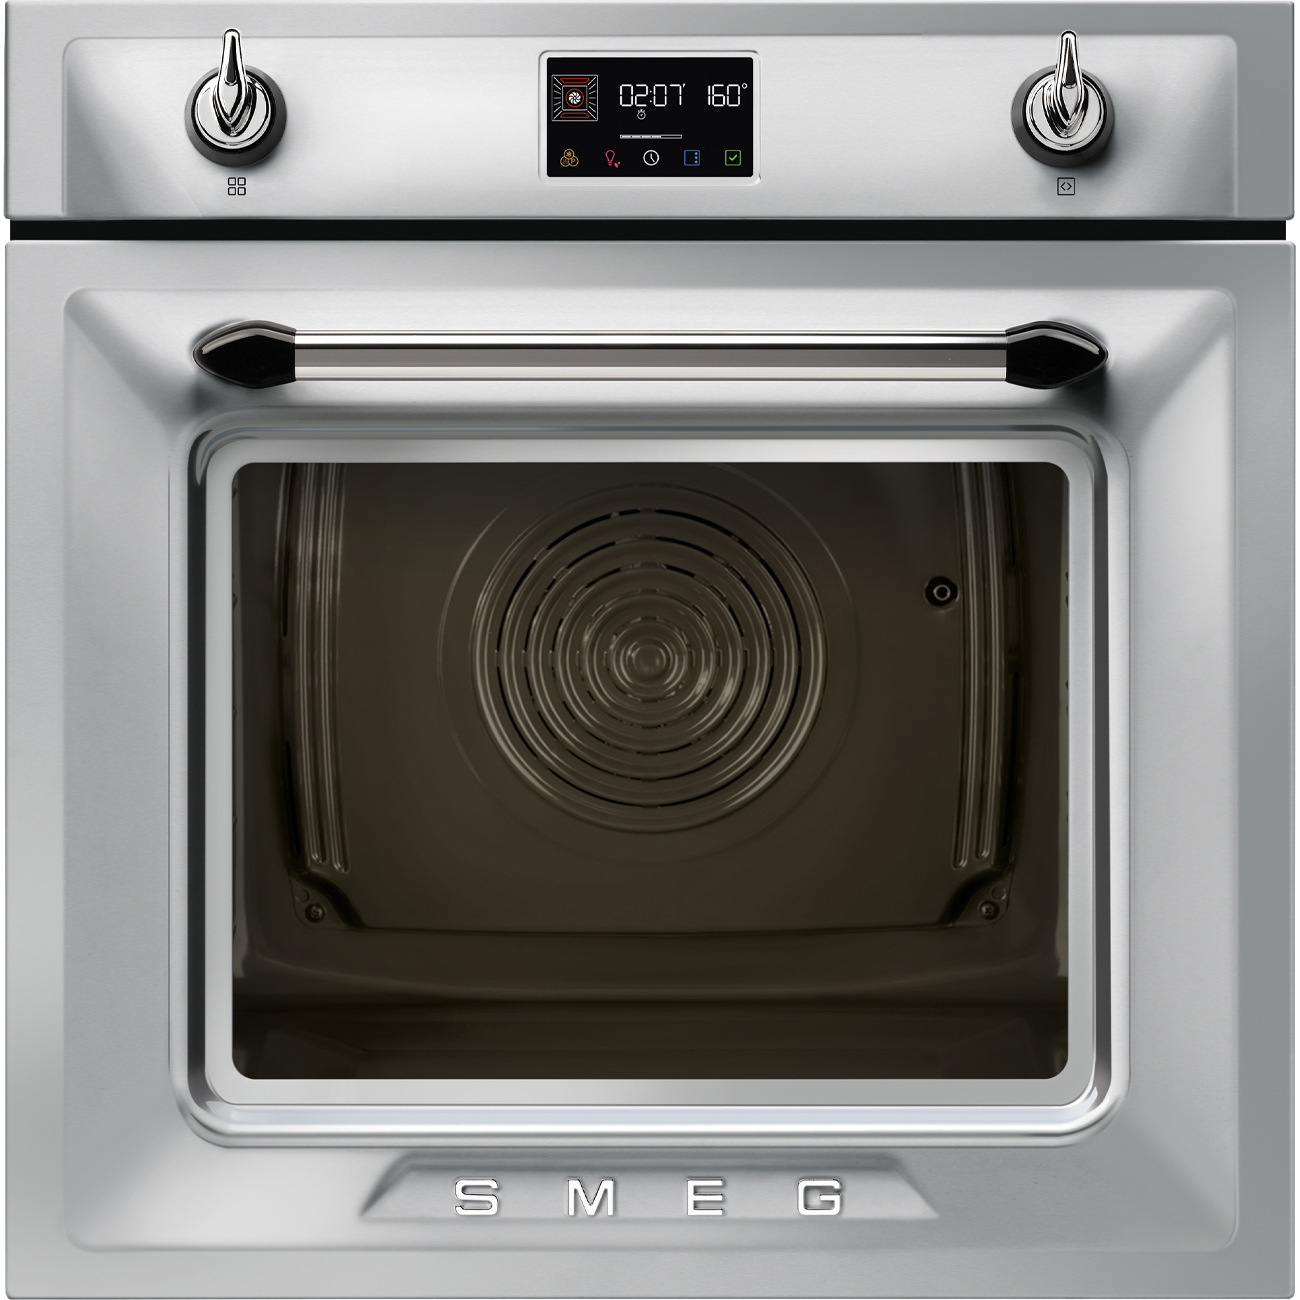 Stainless steel SteamOne Galileo Oven.  60cm. Built-in. Smeg_1